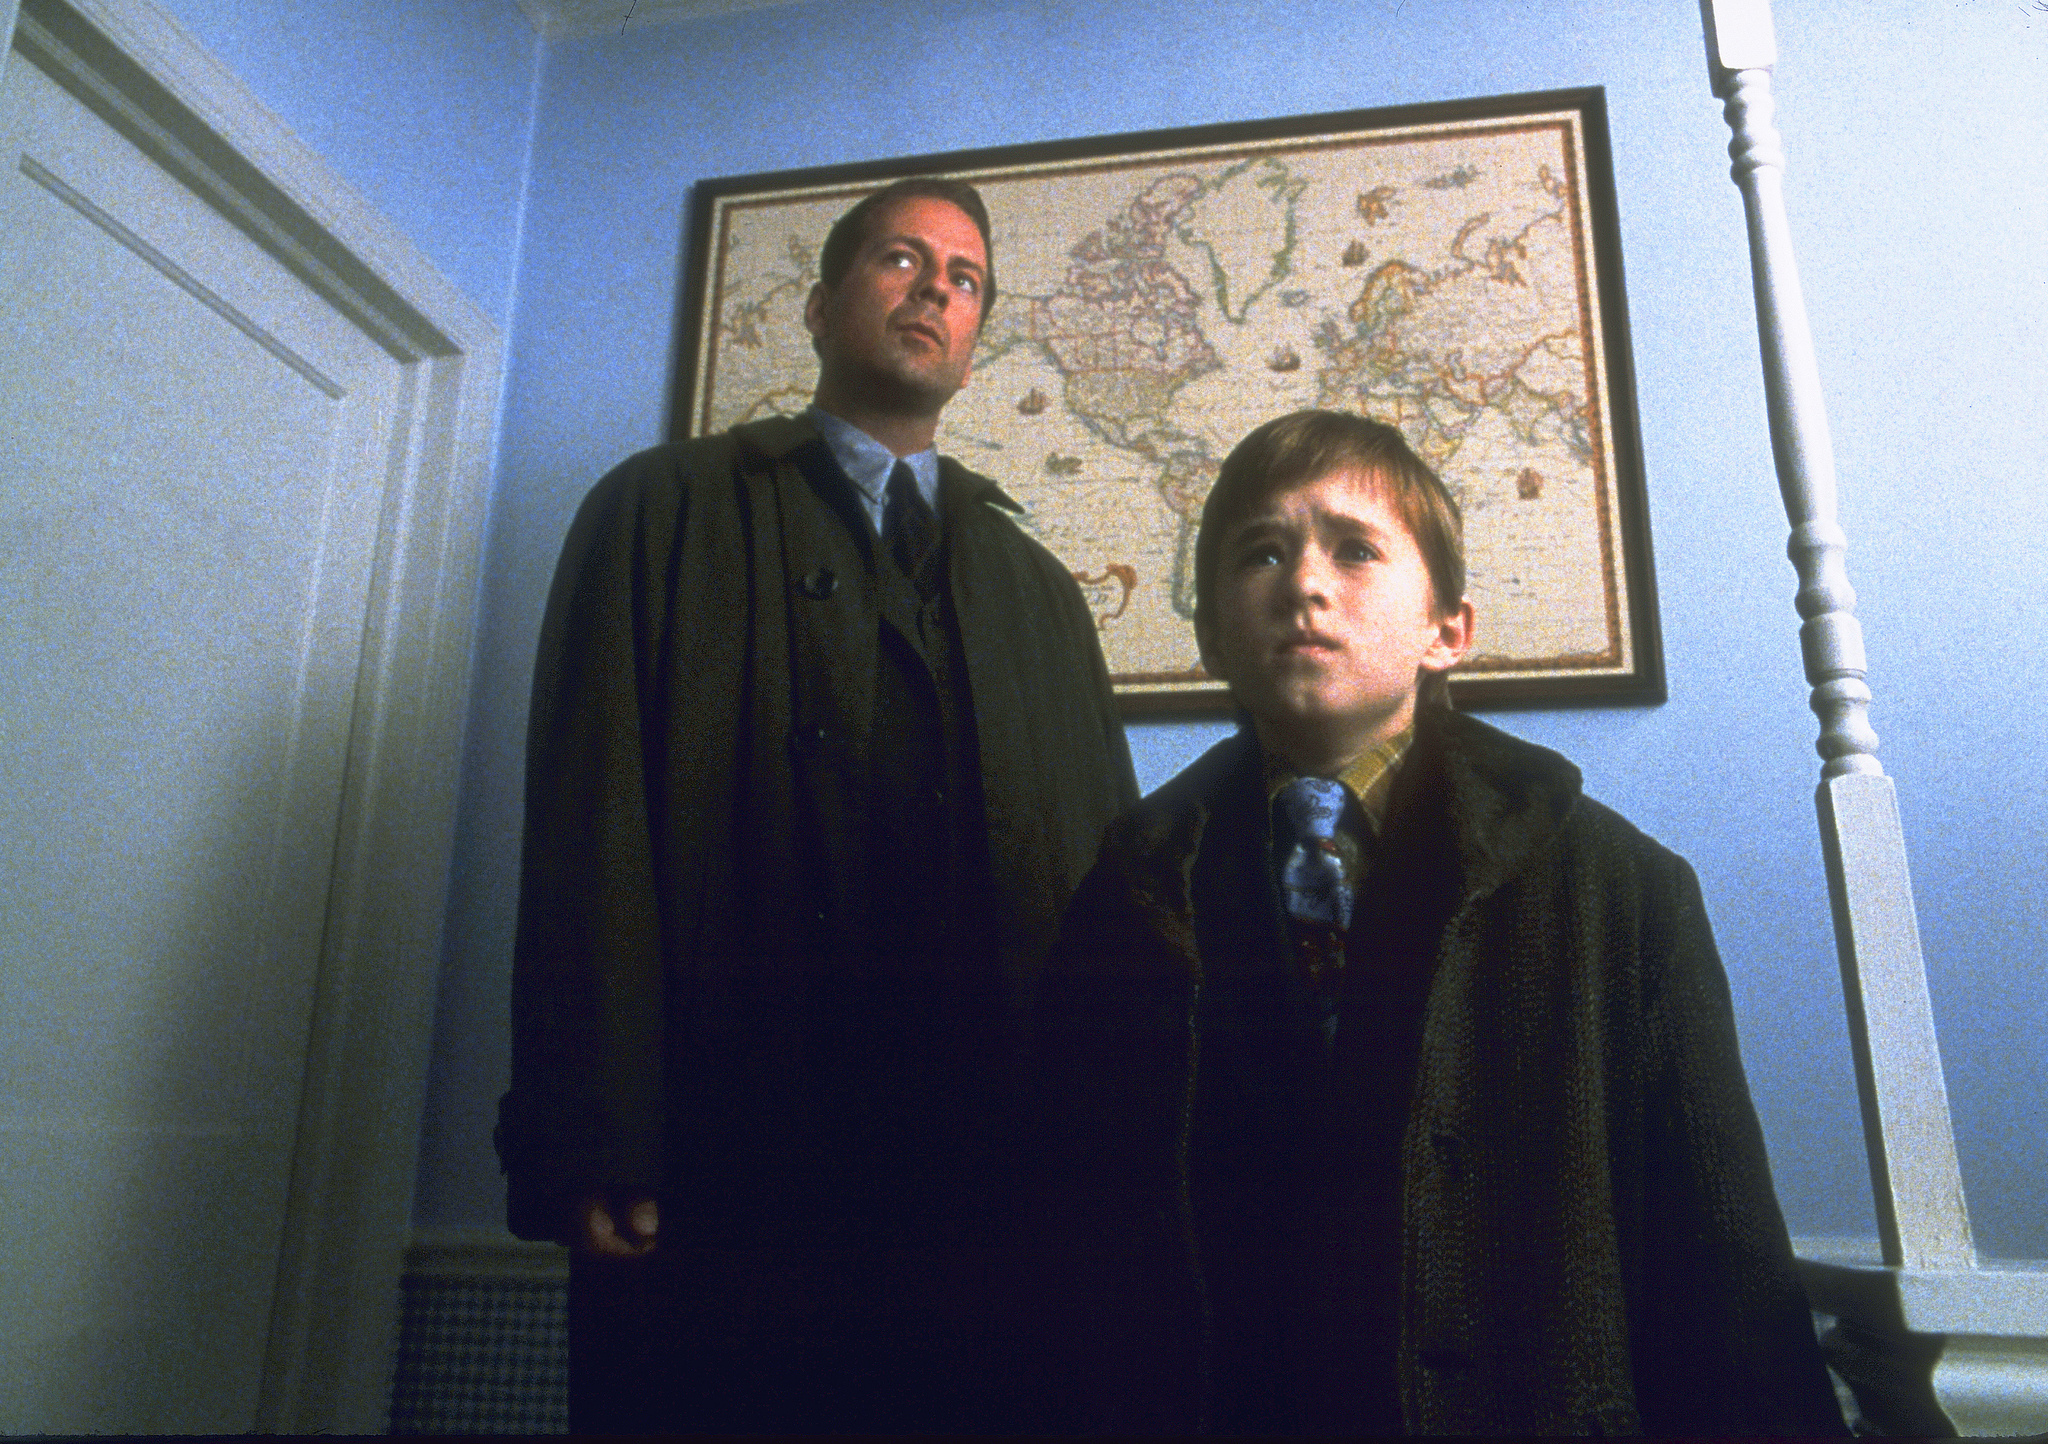 Bruce Willis and Haley Joel Osment in The Sixth Sense (1999)